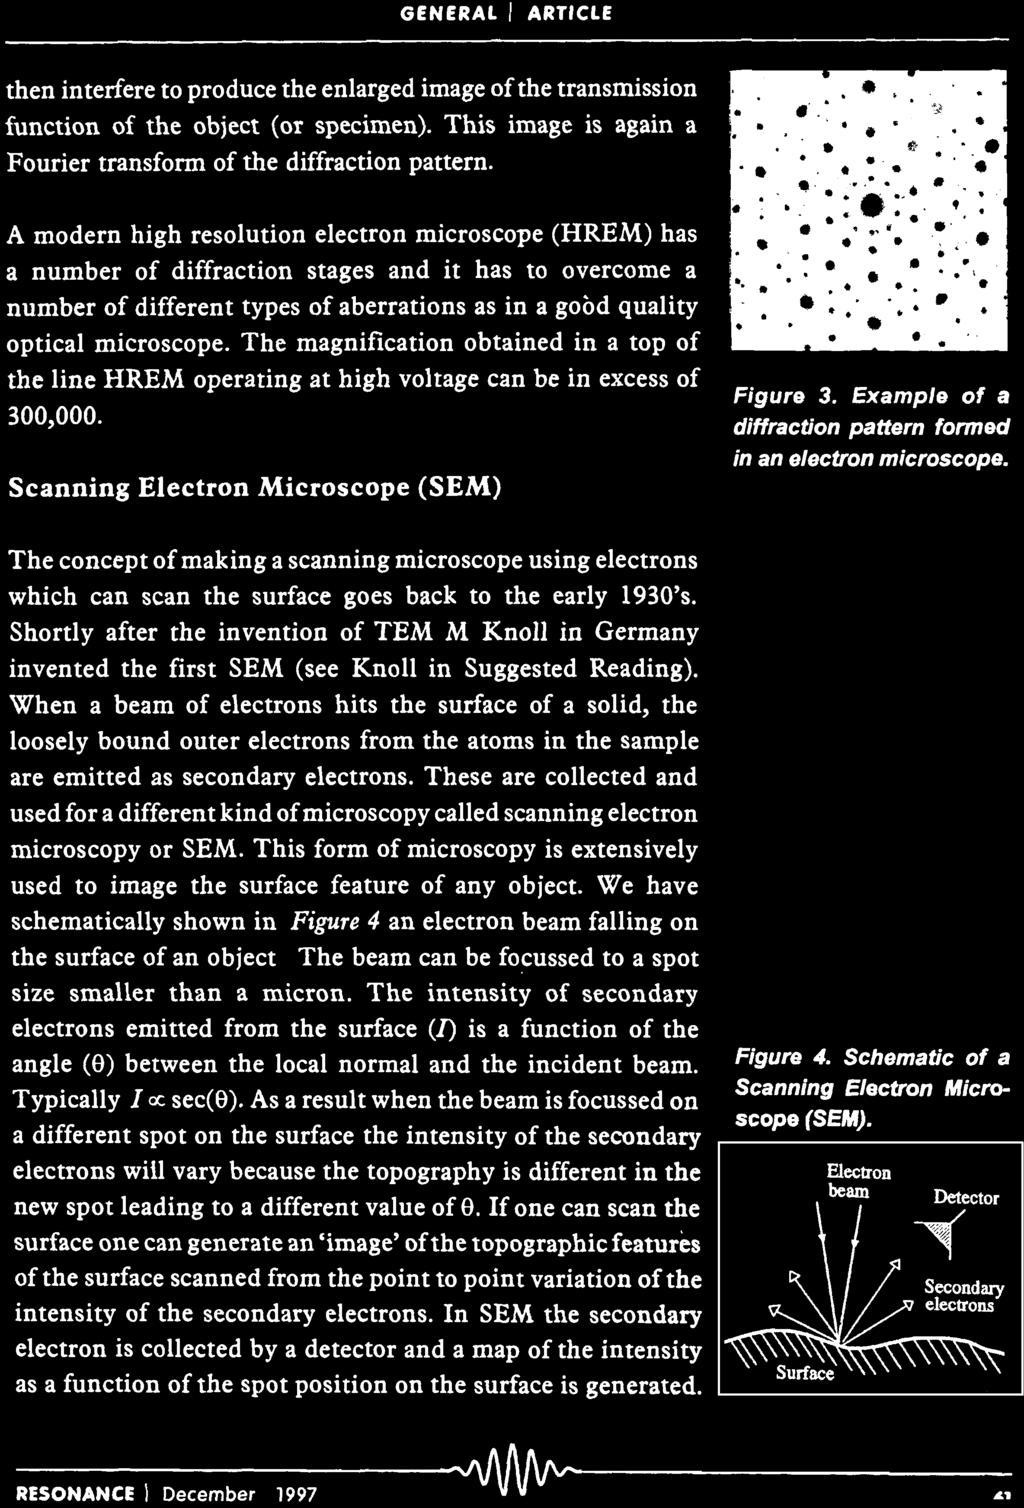 GENERAL I ARTICLE then interfere to produce the enlarged image of the transmission function of the object (or specimen). This image is again a Fourier transform of the diffraction pattern.